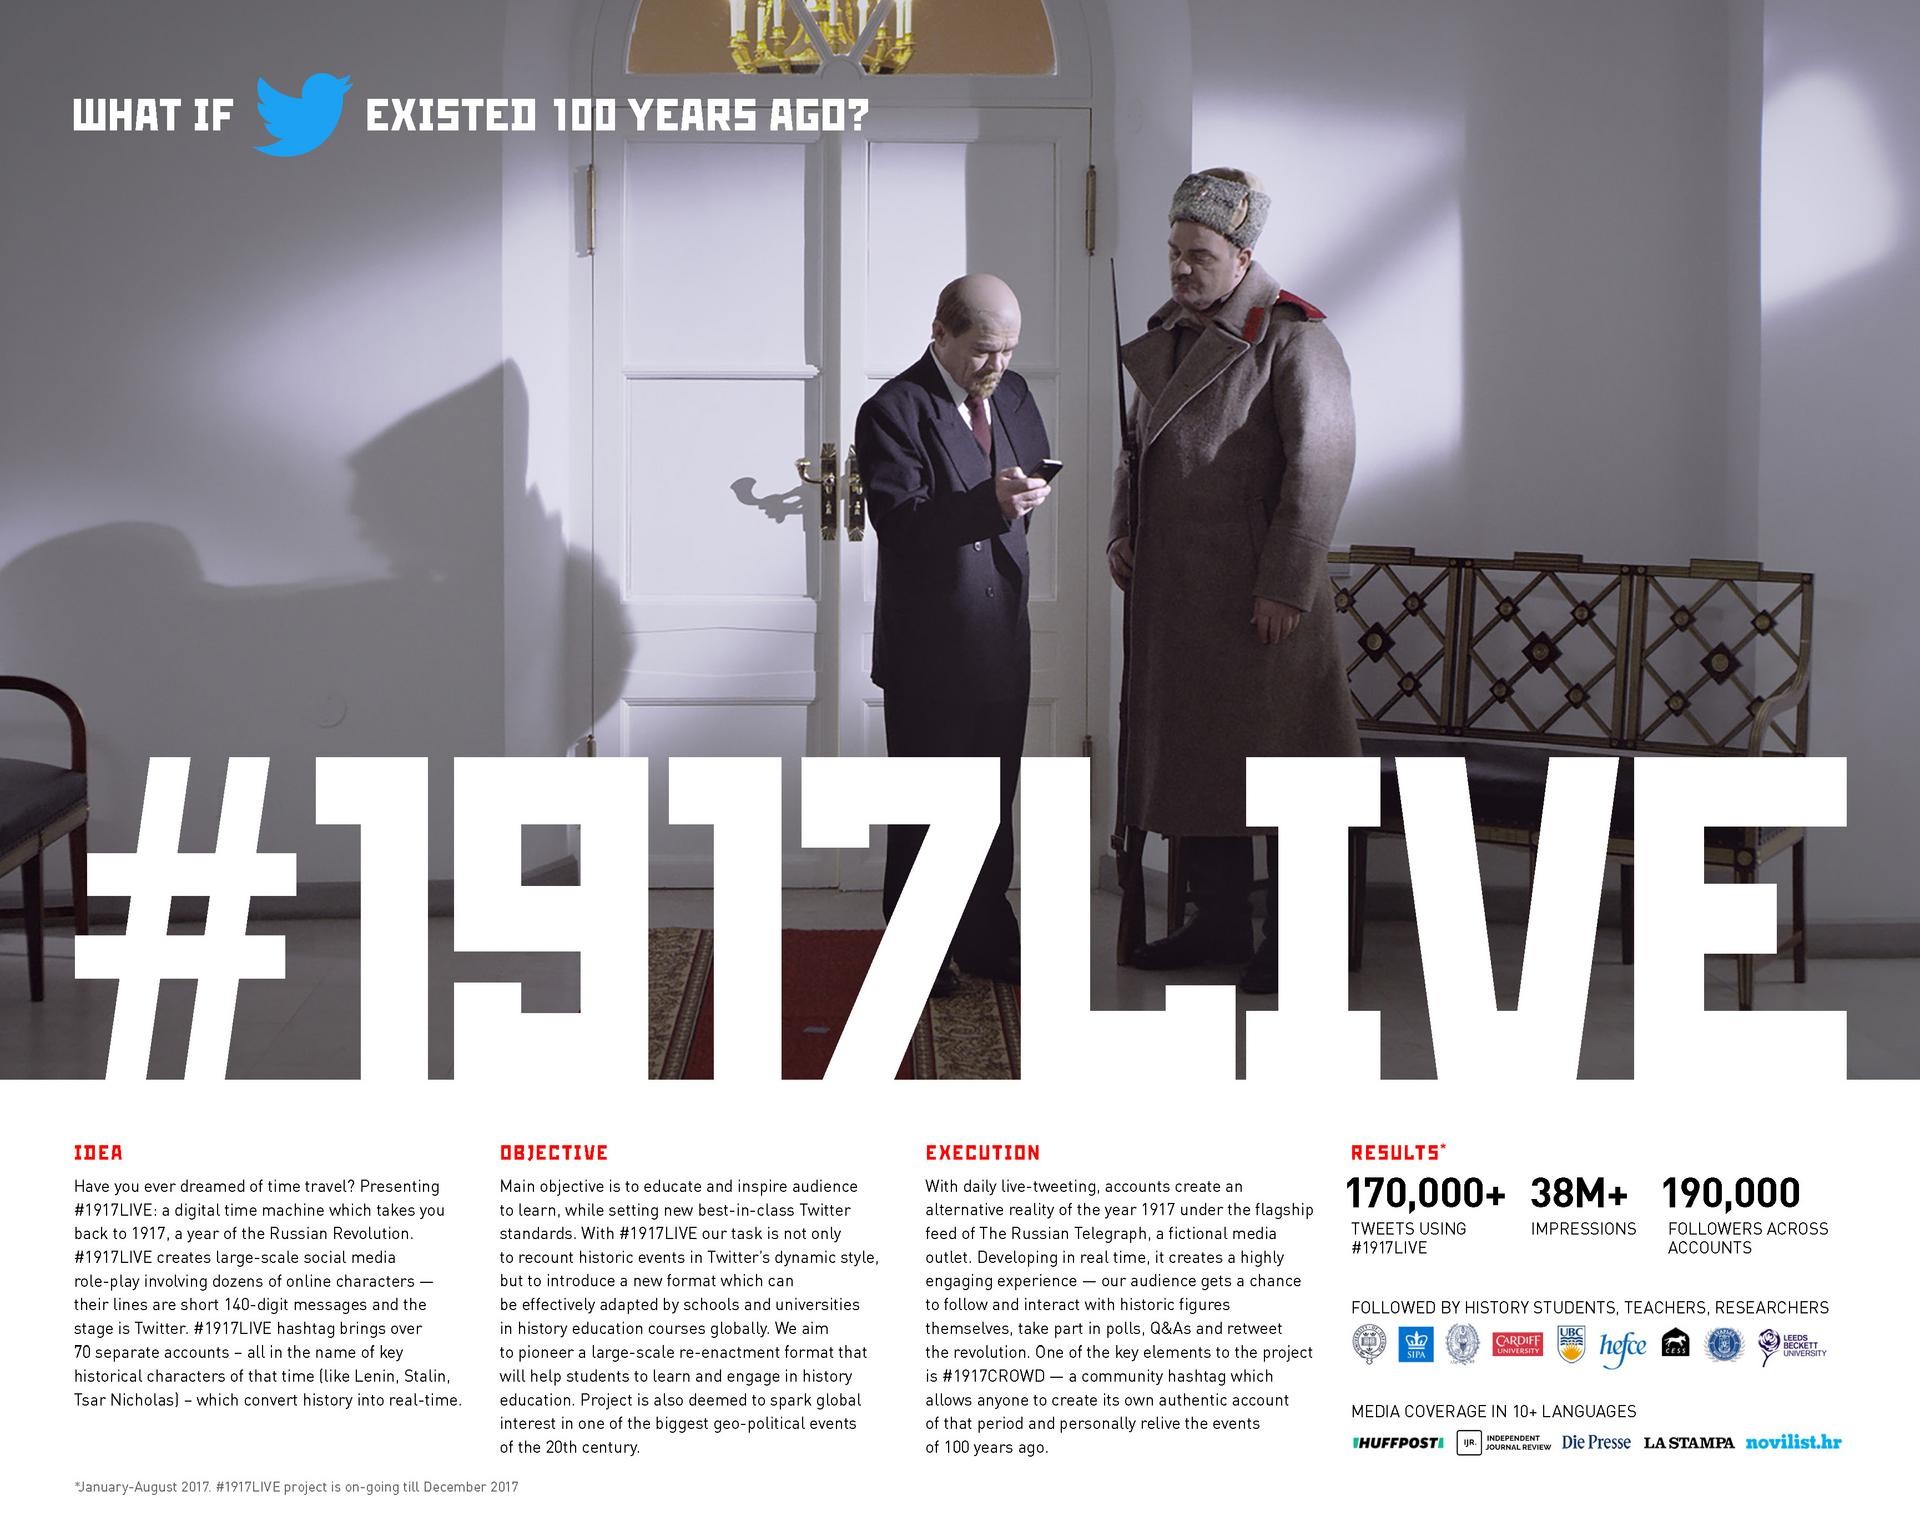 #1917LIVE: What if Twitter existed 100 years ago?